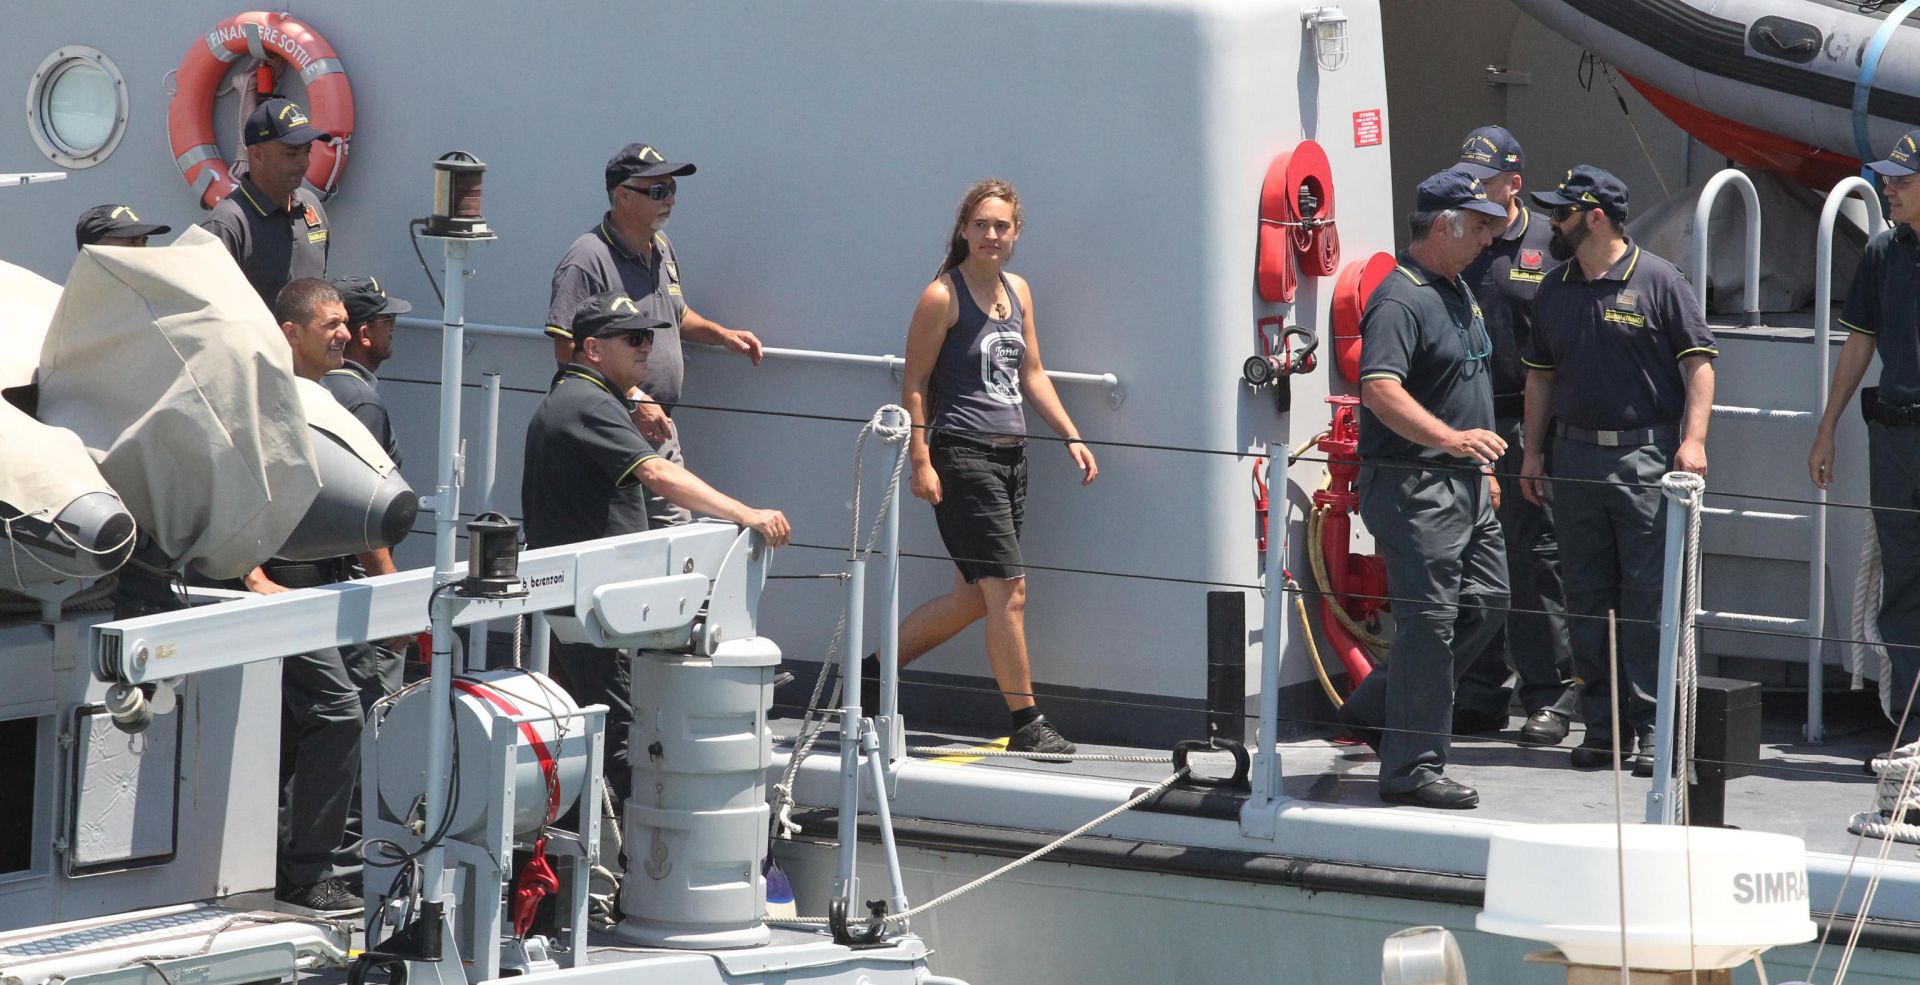 epa07686970 Rescue ship 'Sea-Watch 3' captain Carola Rackete (C), who is being held on charges of abetting immigration and ramming a police cutter, is escorted as she arrives in Porto Empedocle, Italy, 01 July 2019. German captain Carola Rackete was arrested on 29 June reportedly after violating orders from the Italian Finance Police and entering the port of Lampedusa while ramming a patrol boat on migrant rescue ship 'Sea-Watch 3'.  EPA/PASQUALE CLAUDIO MONTANA LAMPO